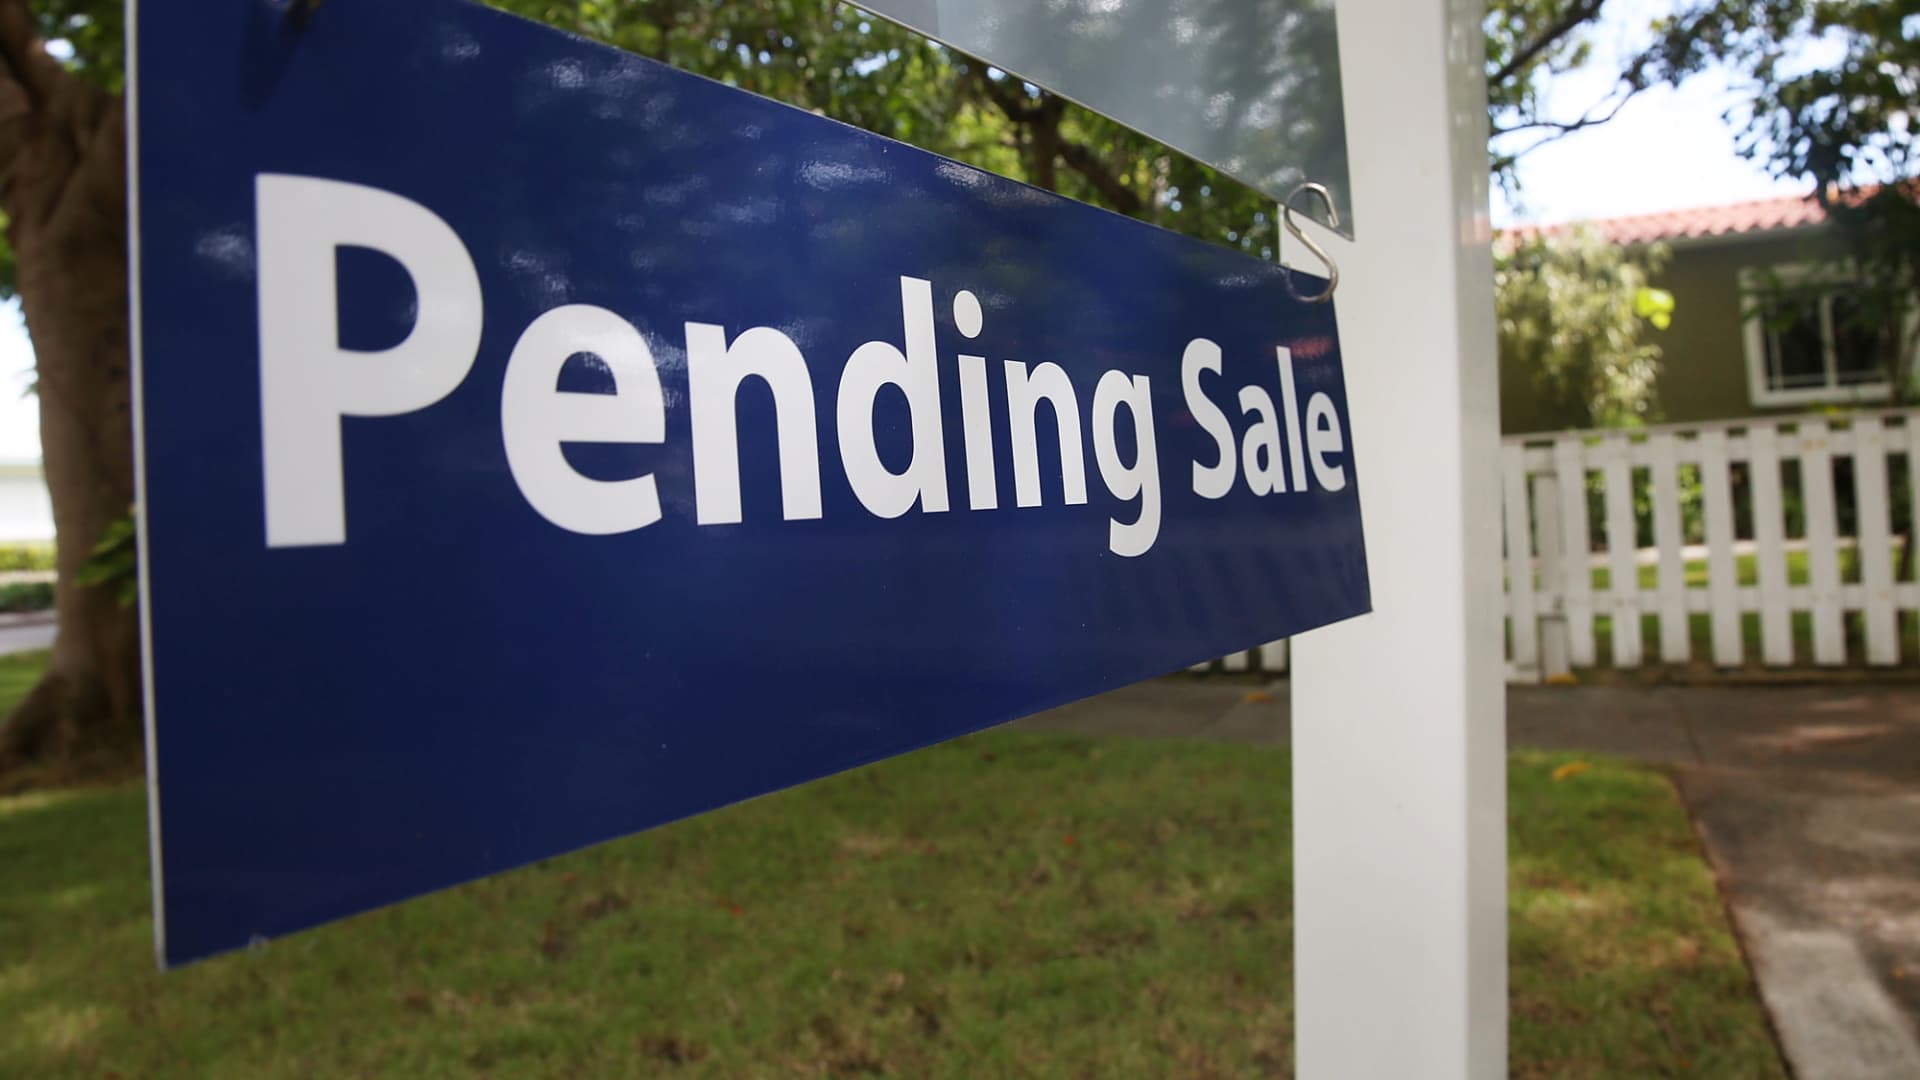 Home sales fall in February ahead of key spring selling season